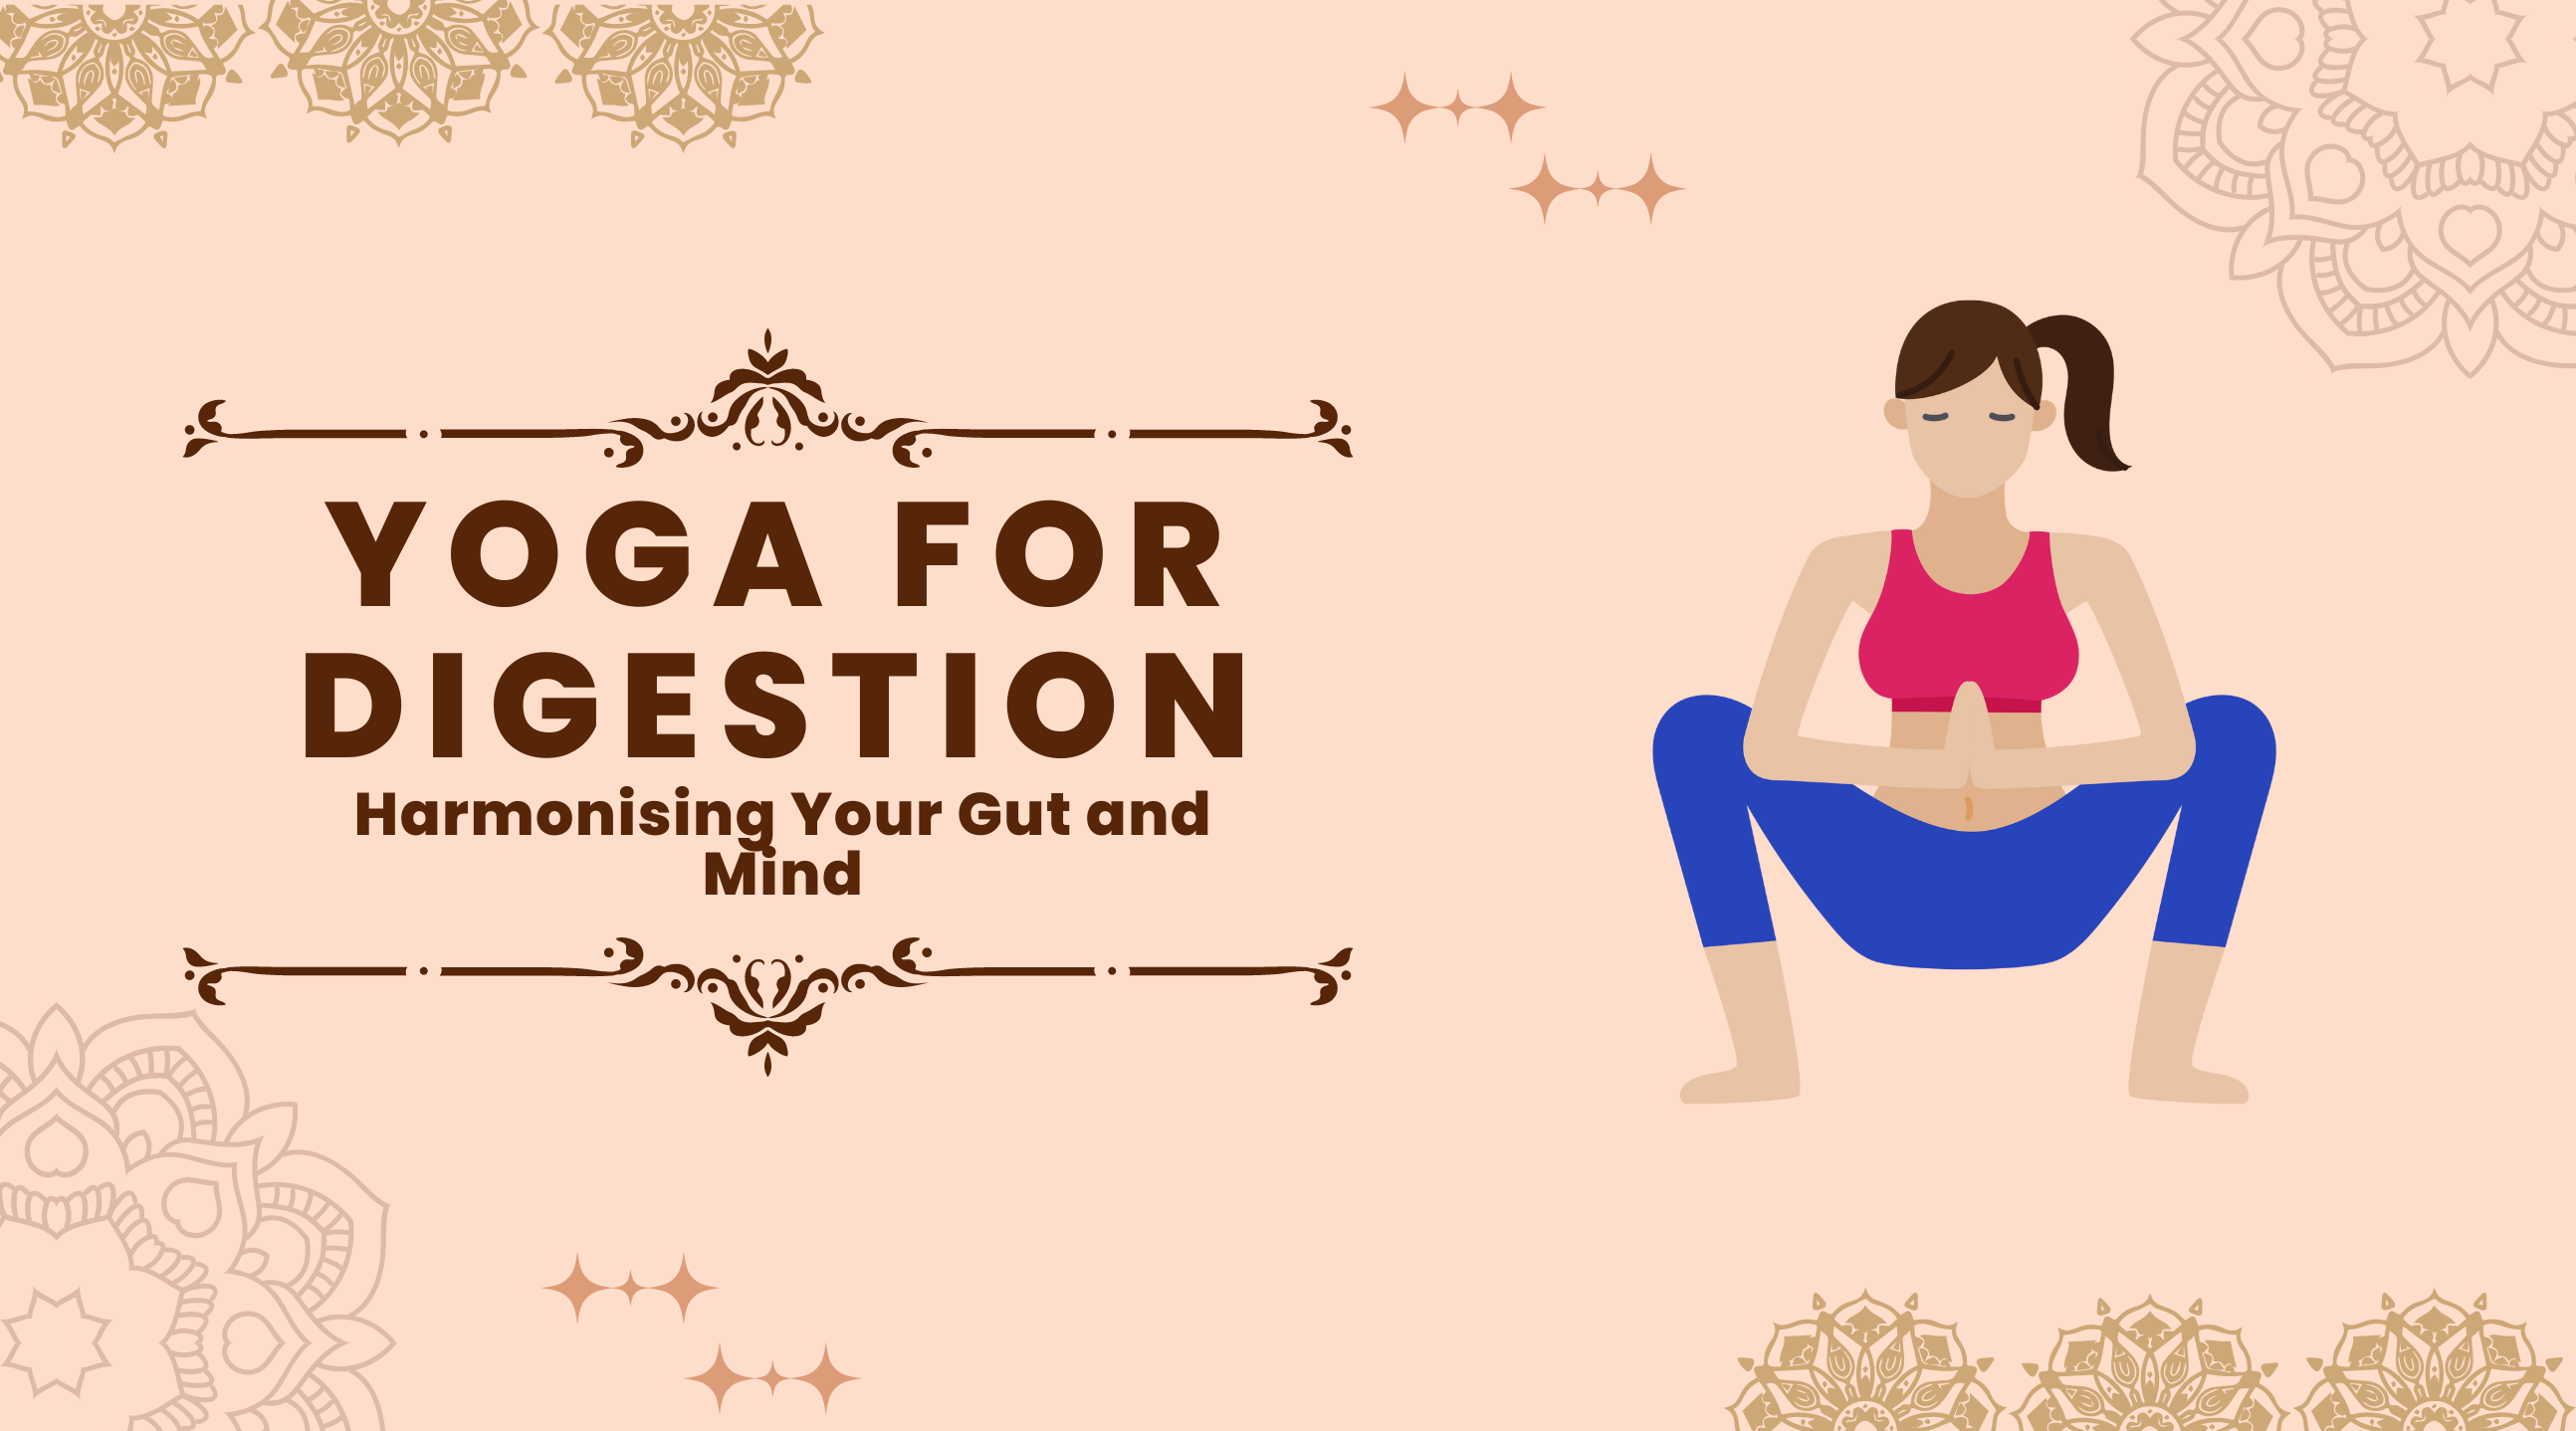 Yoga For Digestion: Harmonising Your Gut and Mind